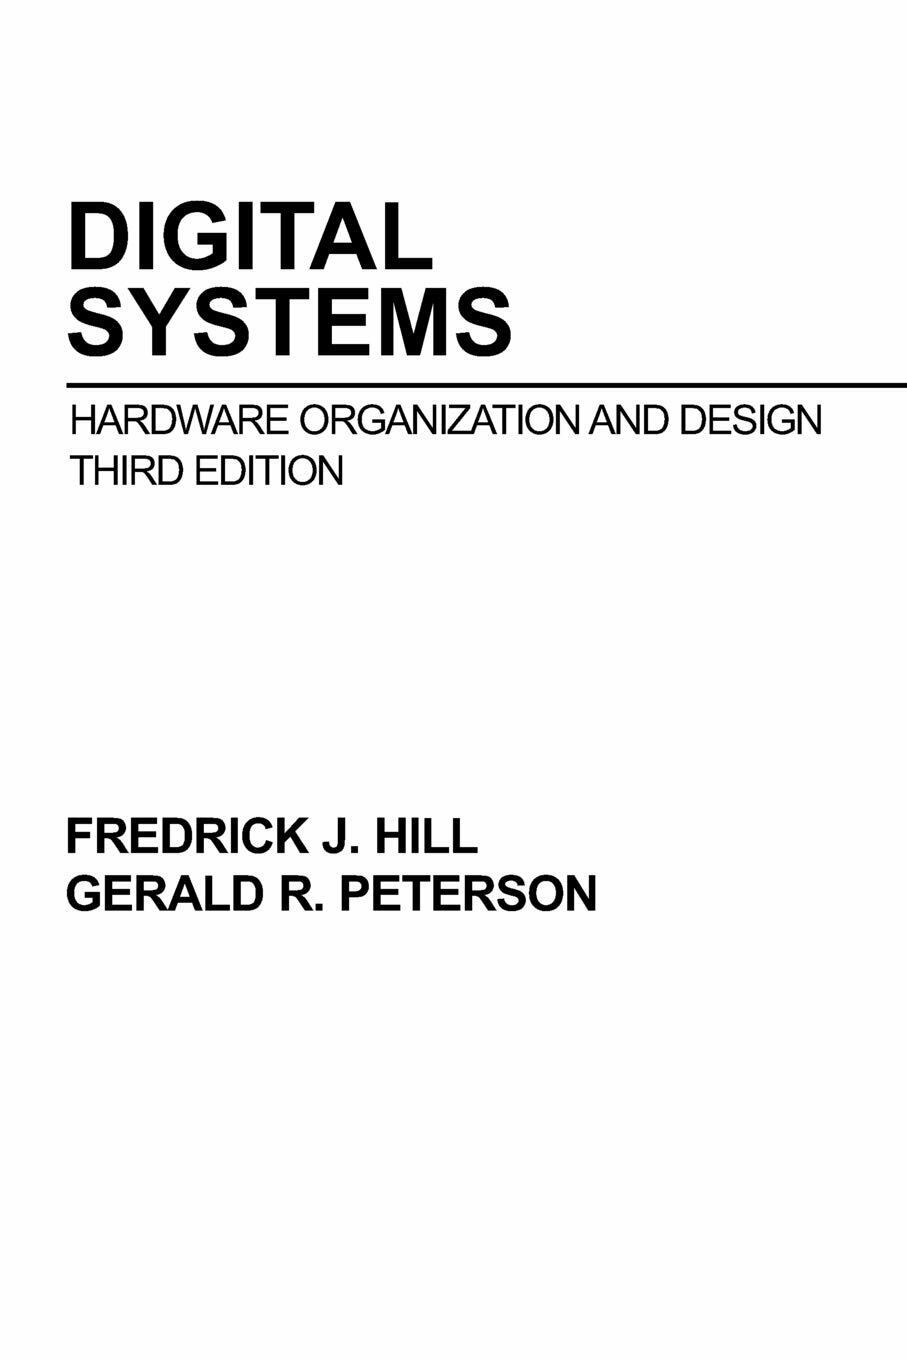 Digital Systems Hardware Organization And Design - John Wiley & Sons - 1987